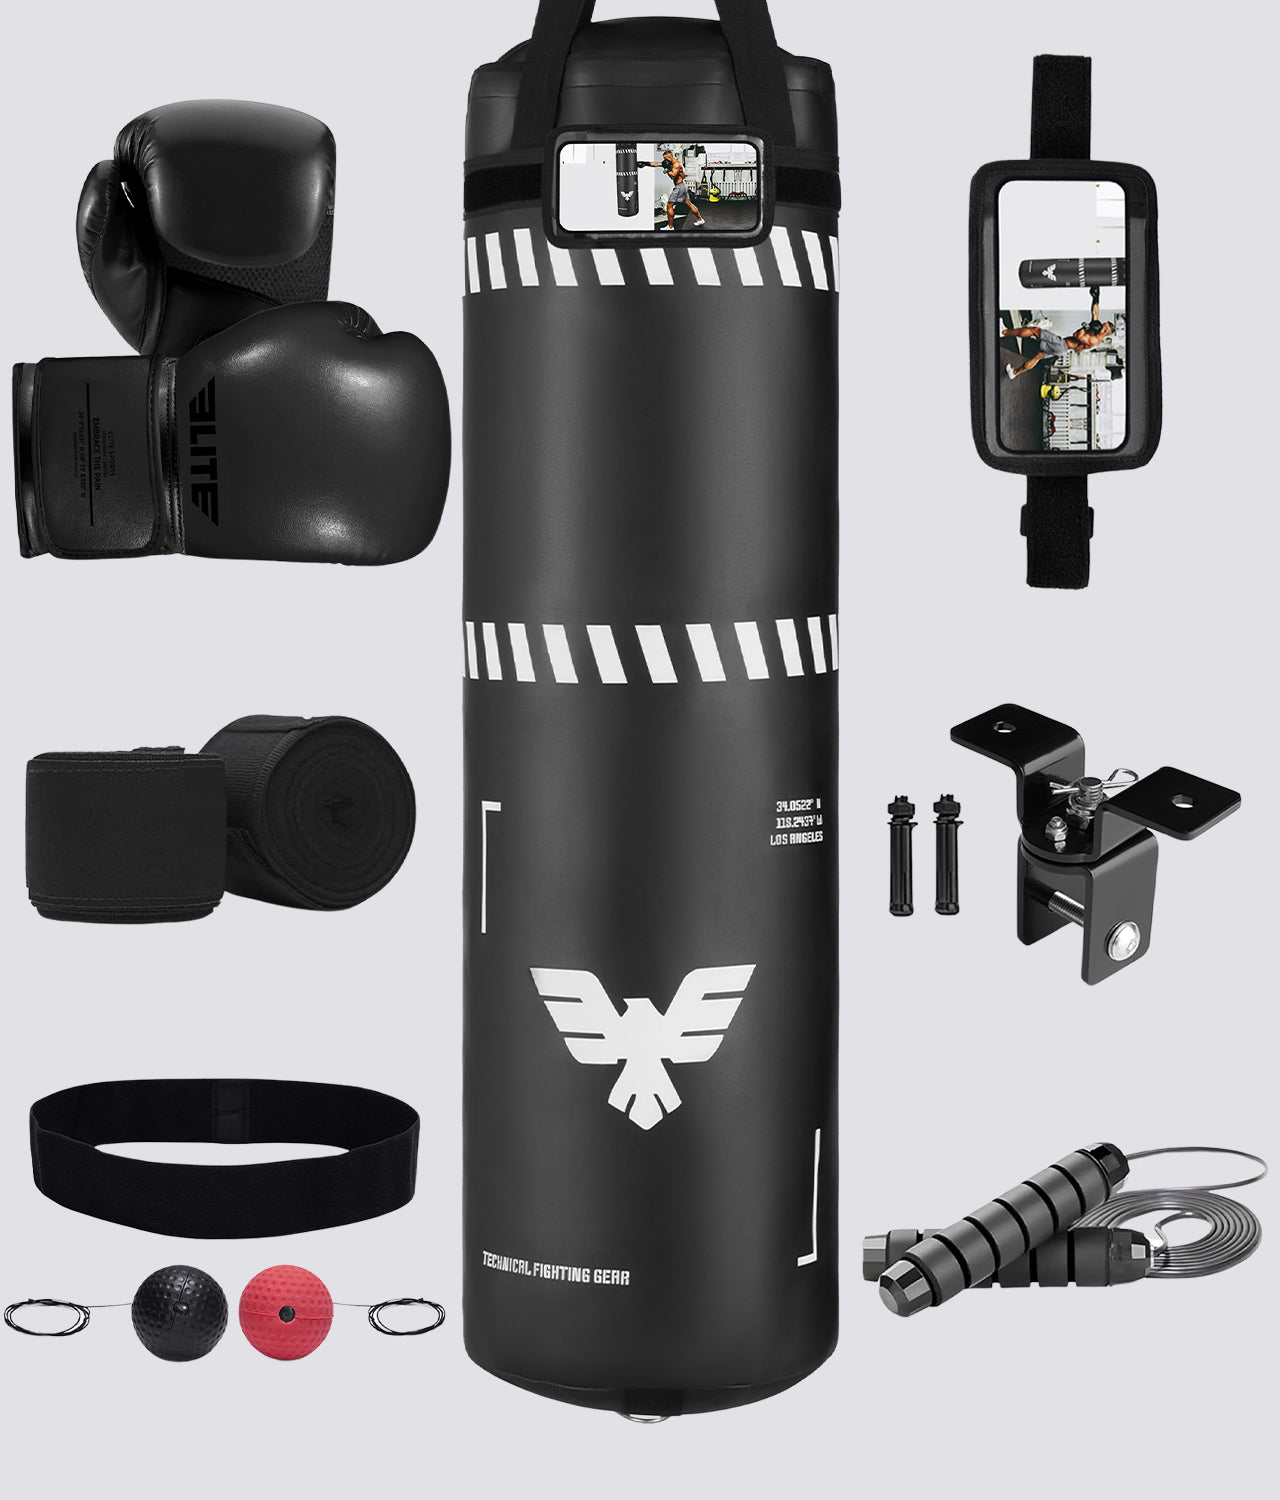 Adults 4 ft Essential Boxing Punching Bag Set